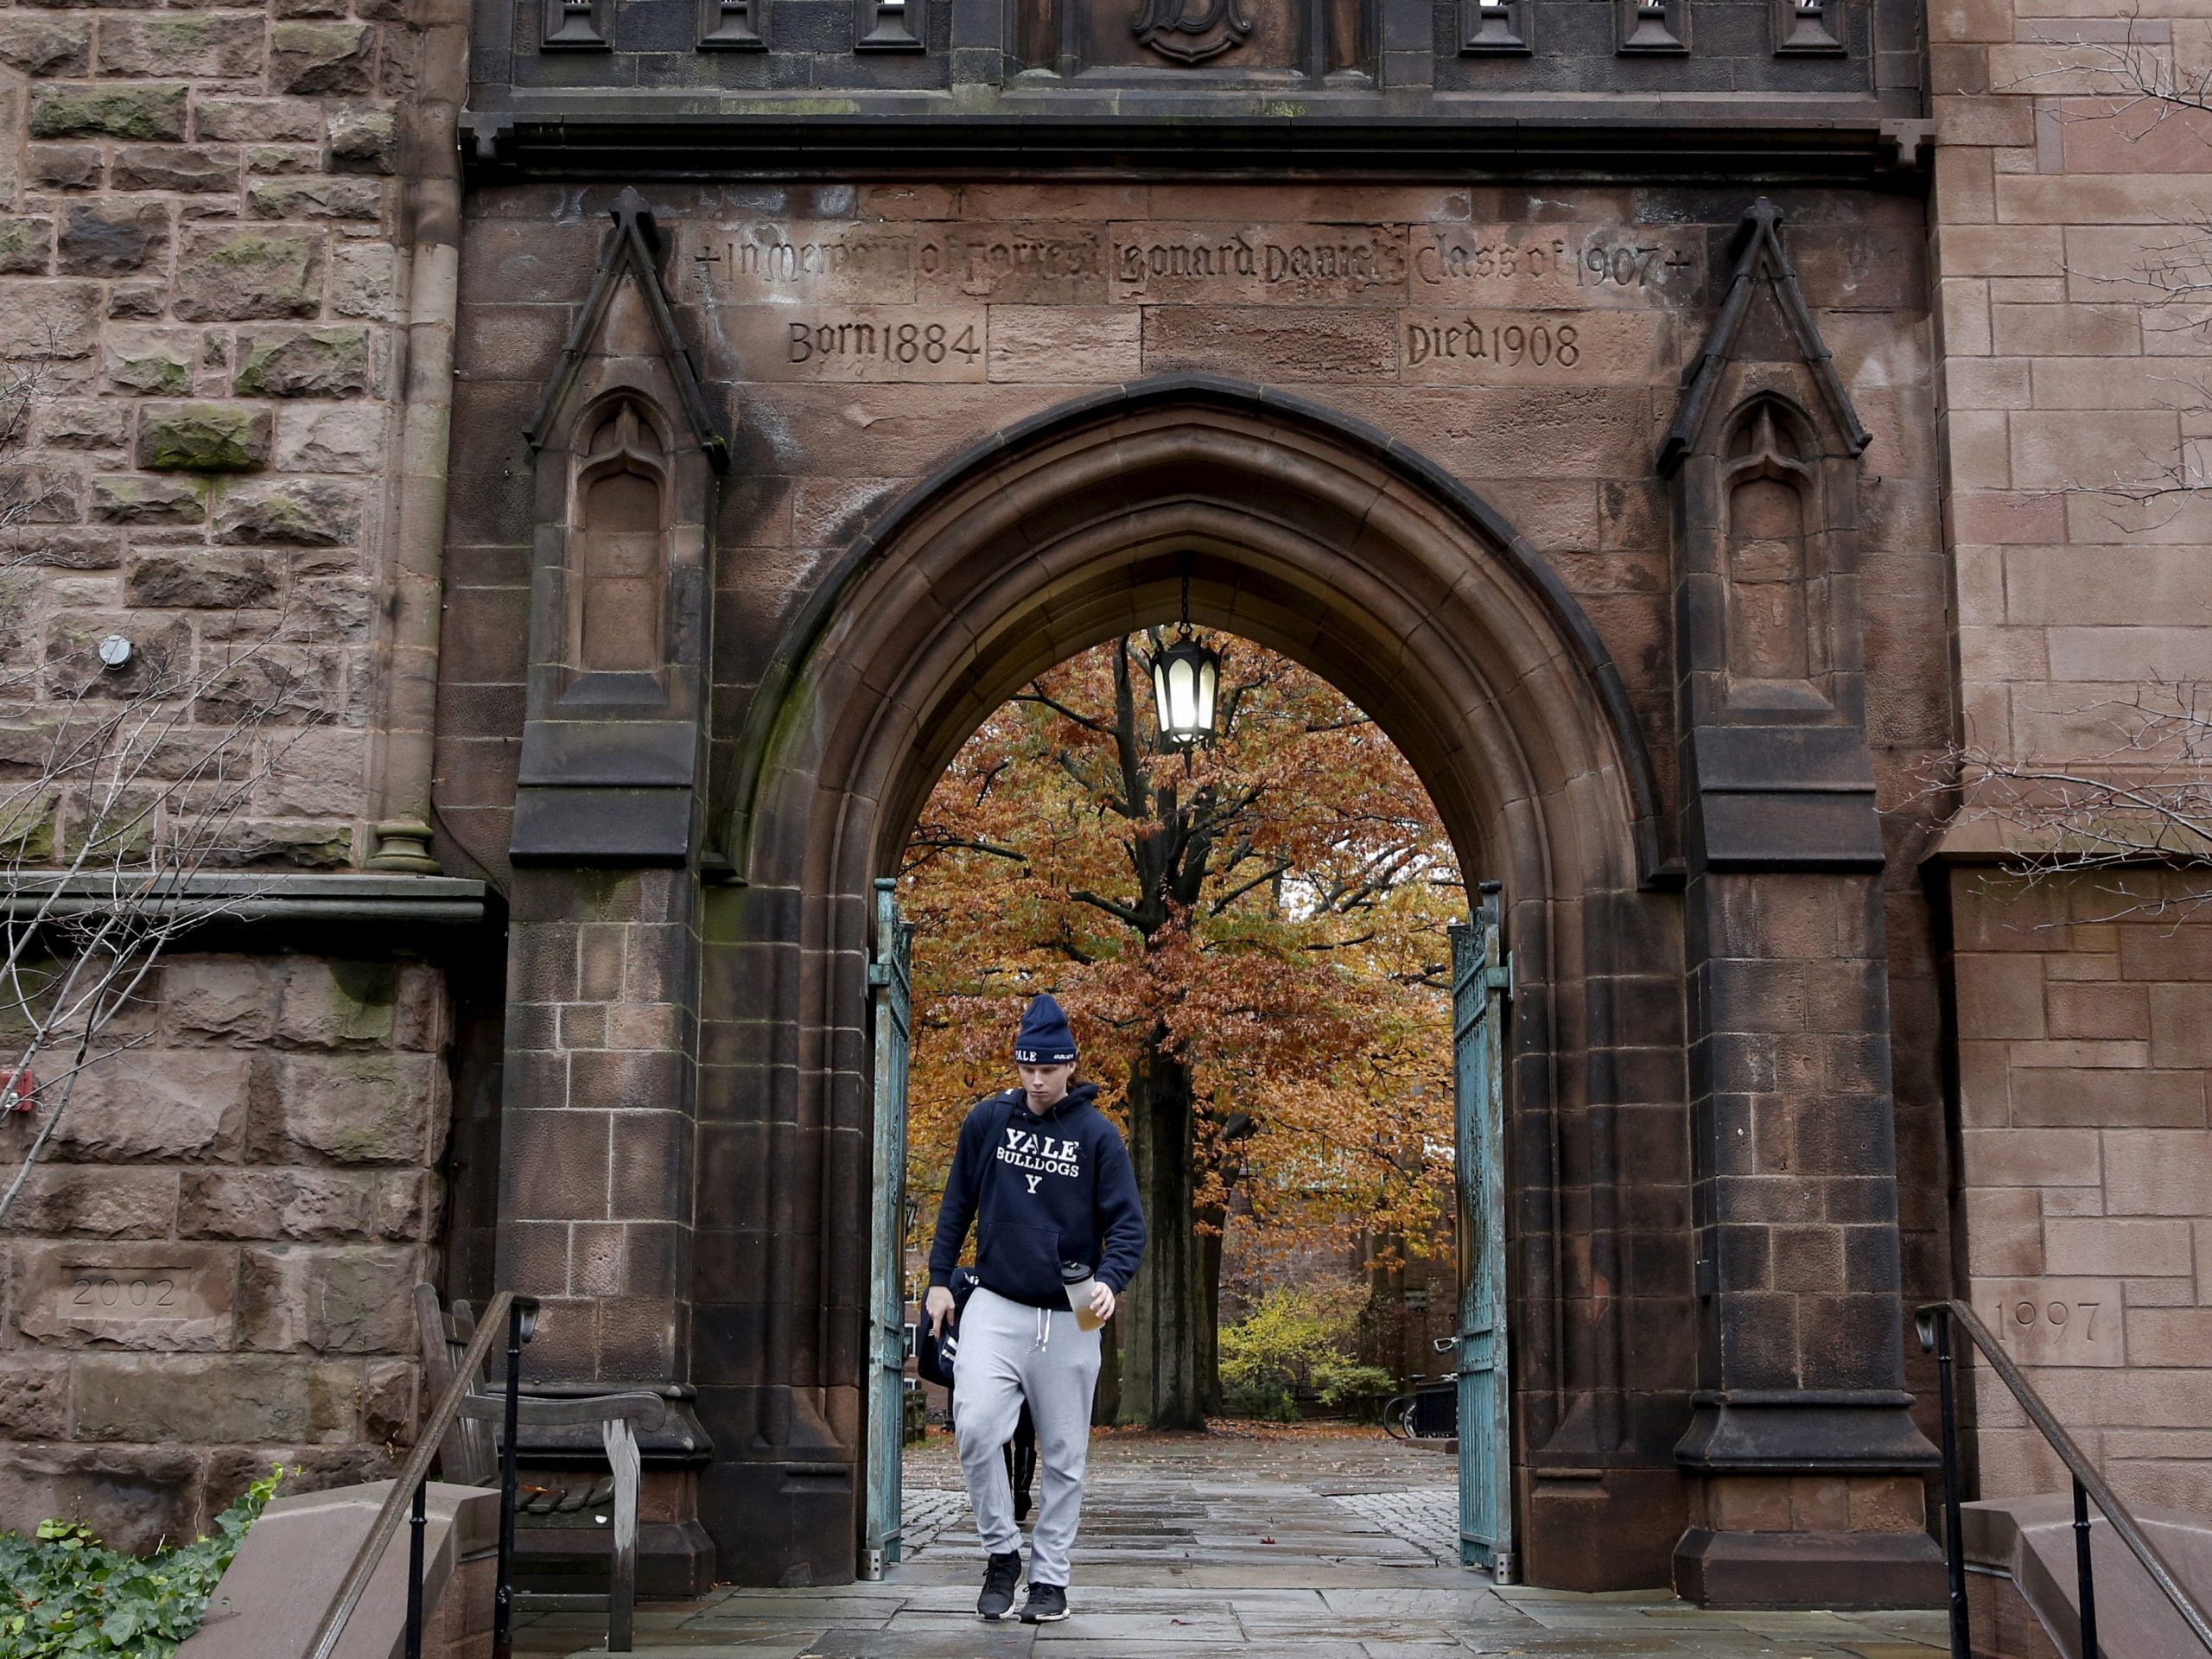 A student wearing a sweatshirt and sweatpants walks below a brick archway, with orange and yellow tree leaves in the background.